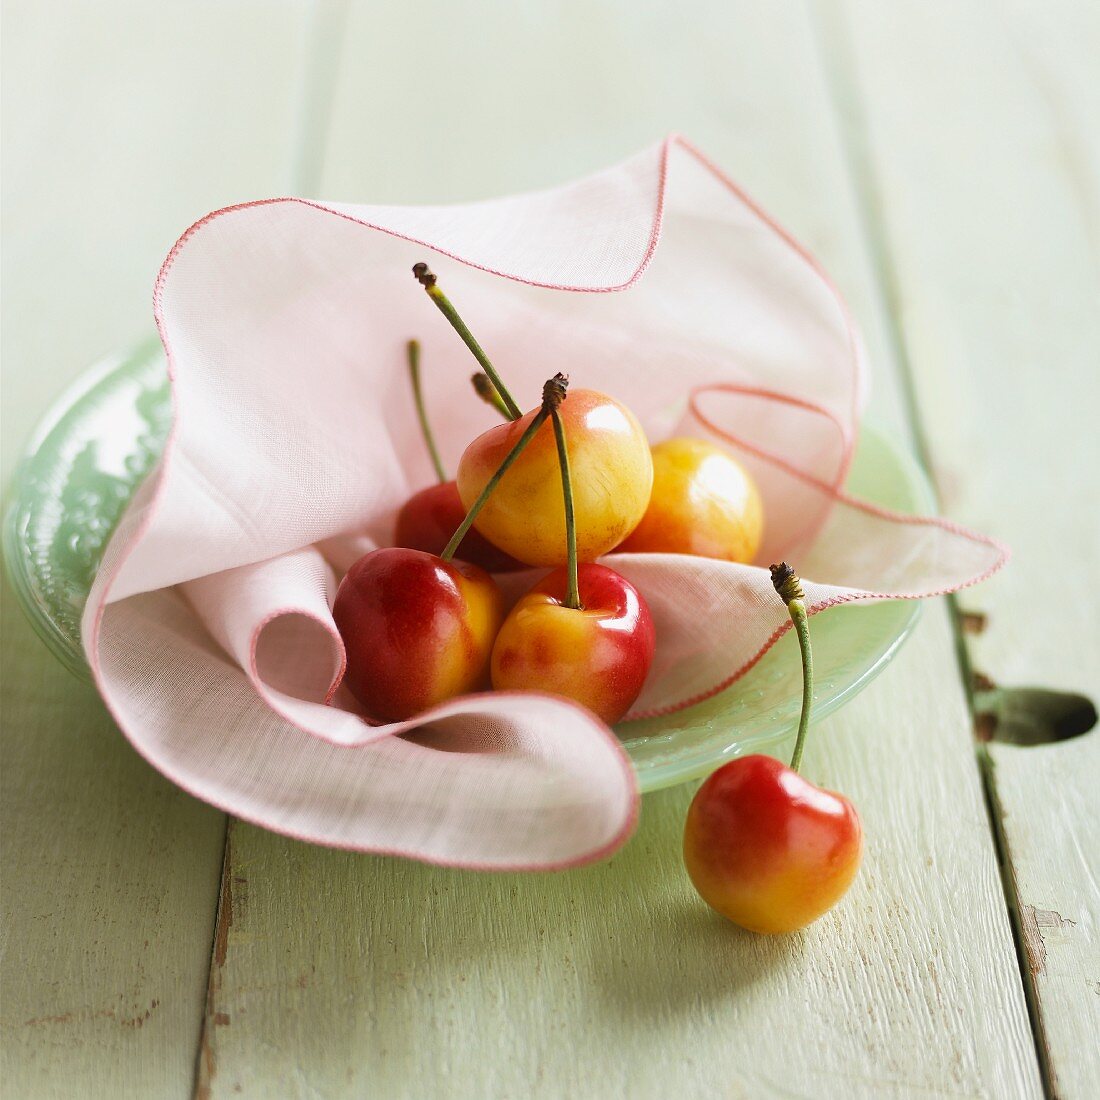 Fresh sweet cherries on a cloth on a plate